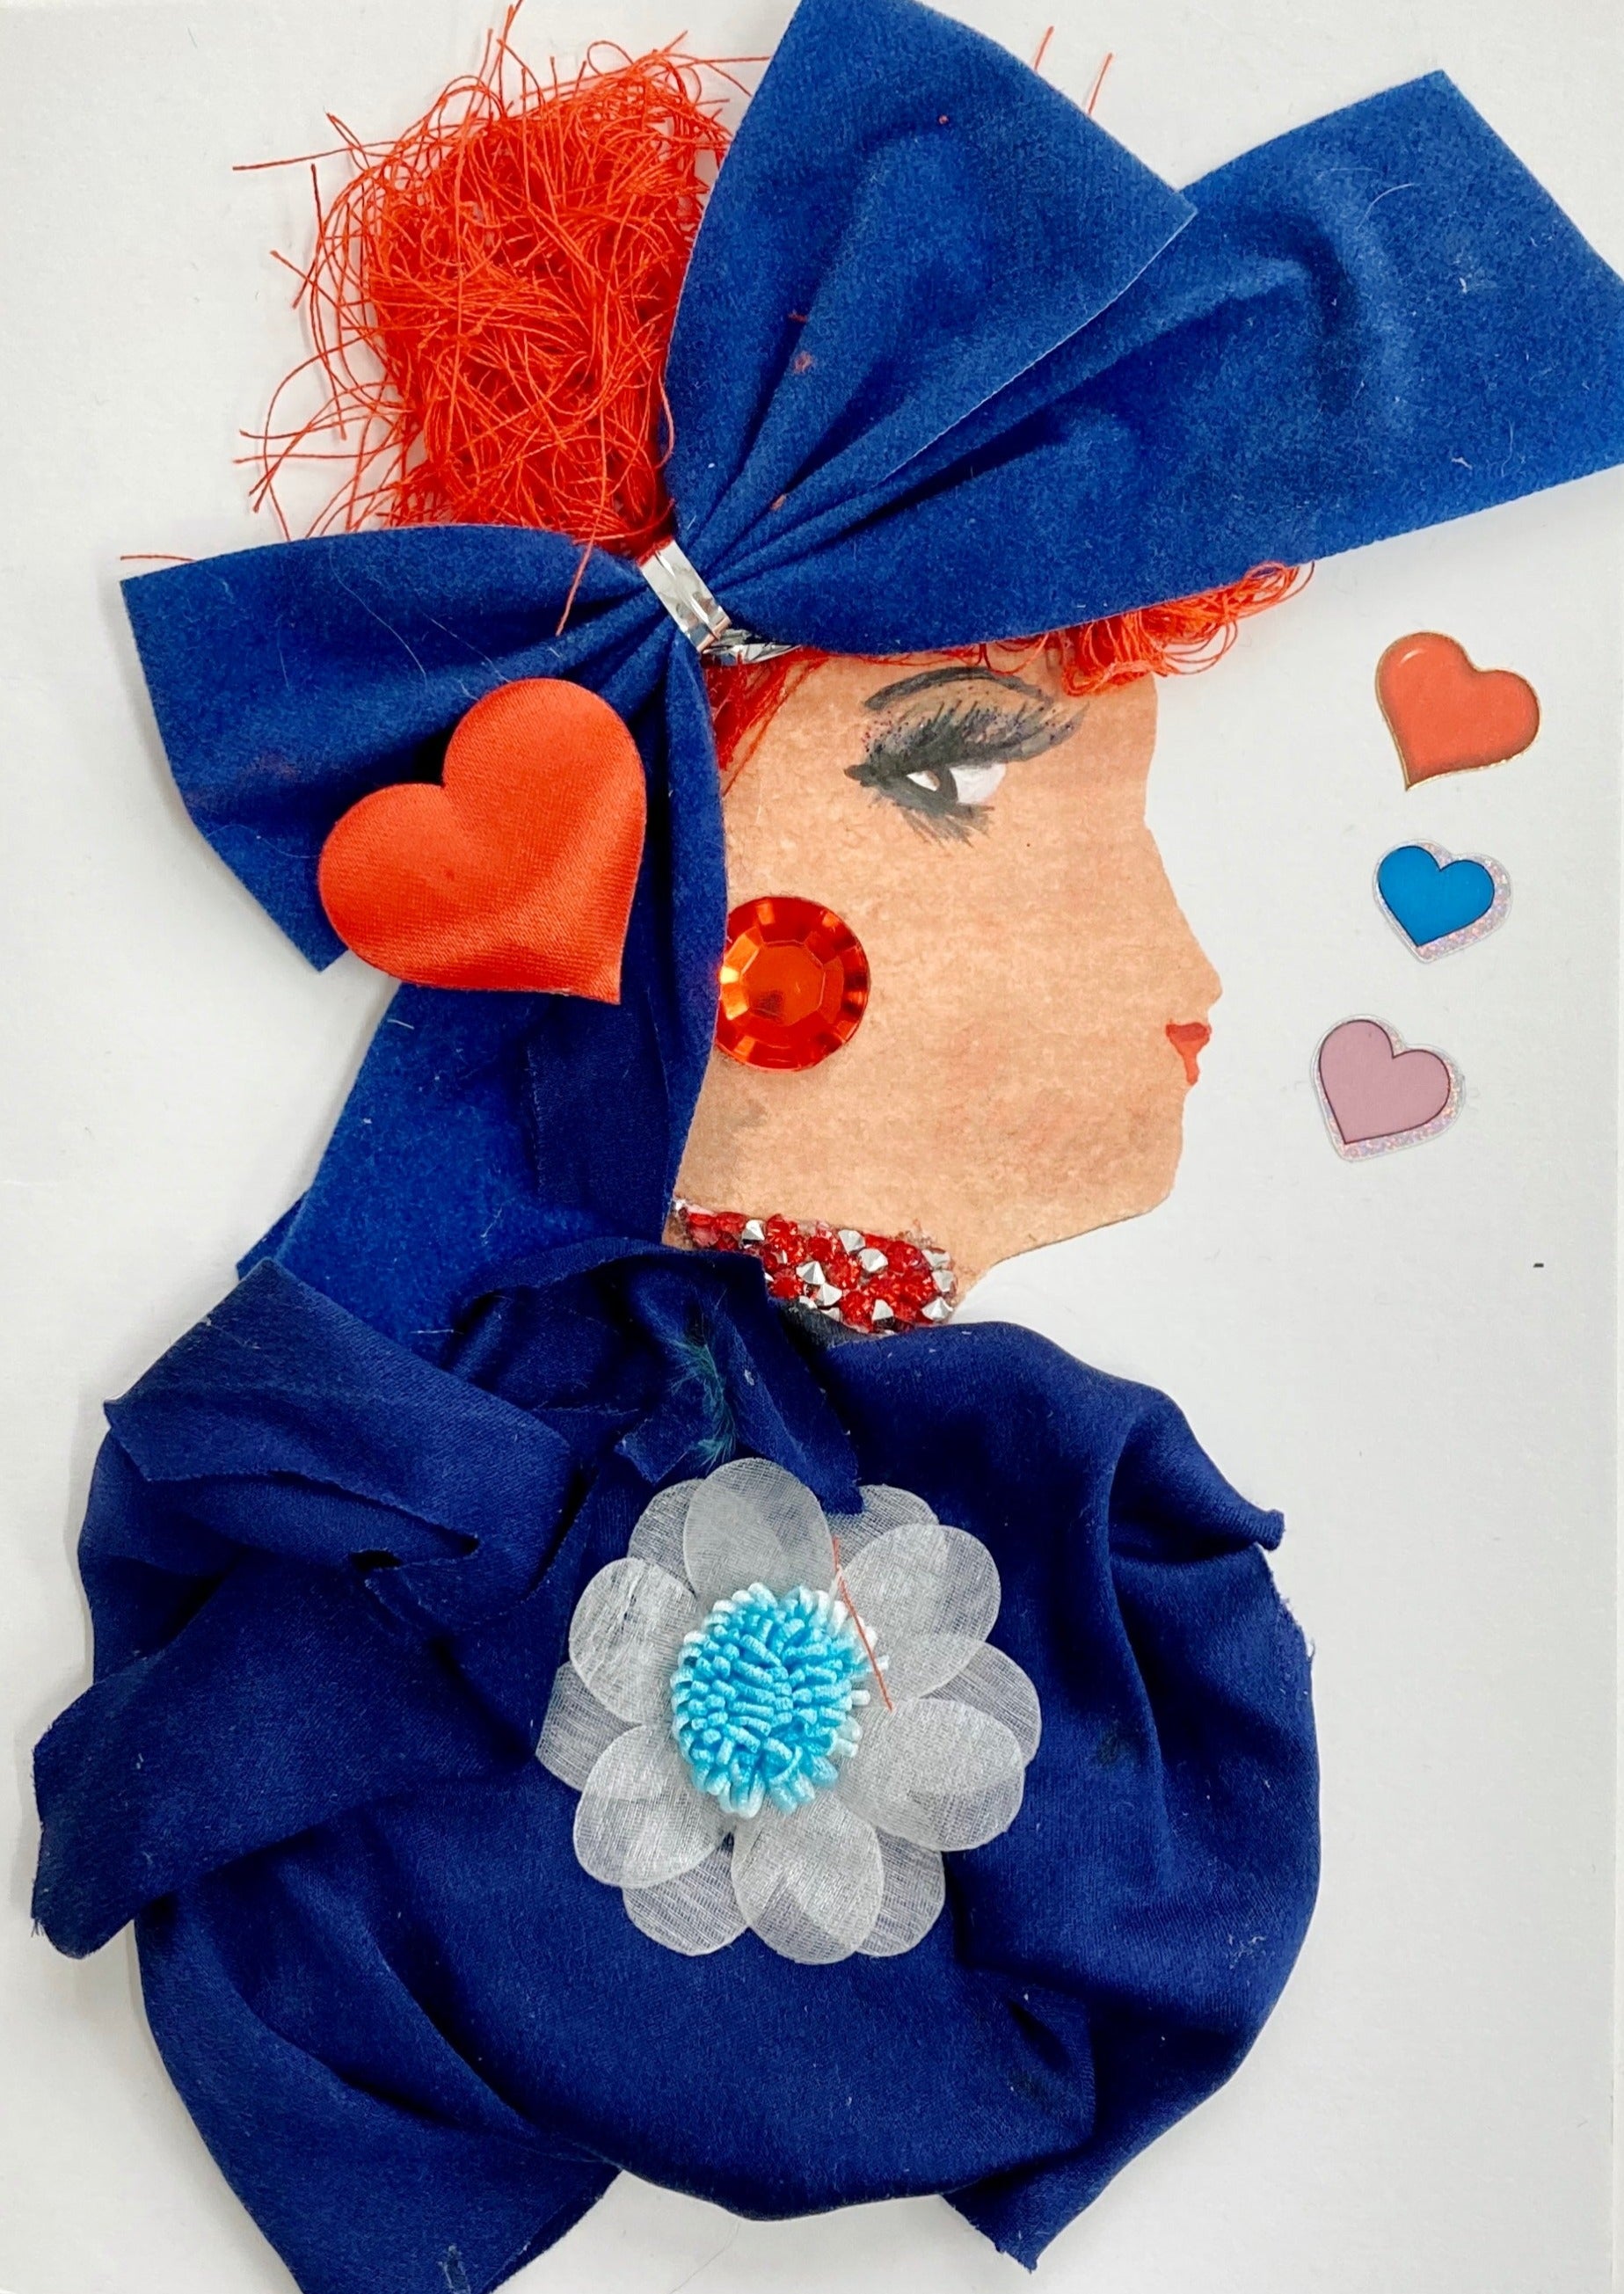 This card has. been given the name Holly. Holly wears a dark blue dress made of a lightweight fabric which has a large white flower pendant in the middle. She wears a large blue bow in her vibrant red hair, and on top of the bow there is a large red heart. Her earring is a large red gem, and her necklace is a cluster of small white and red diamonds. To the right of her, there are red, blue, and pink hearts. 